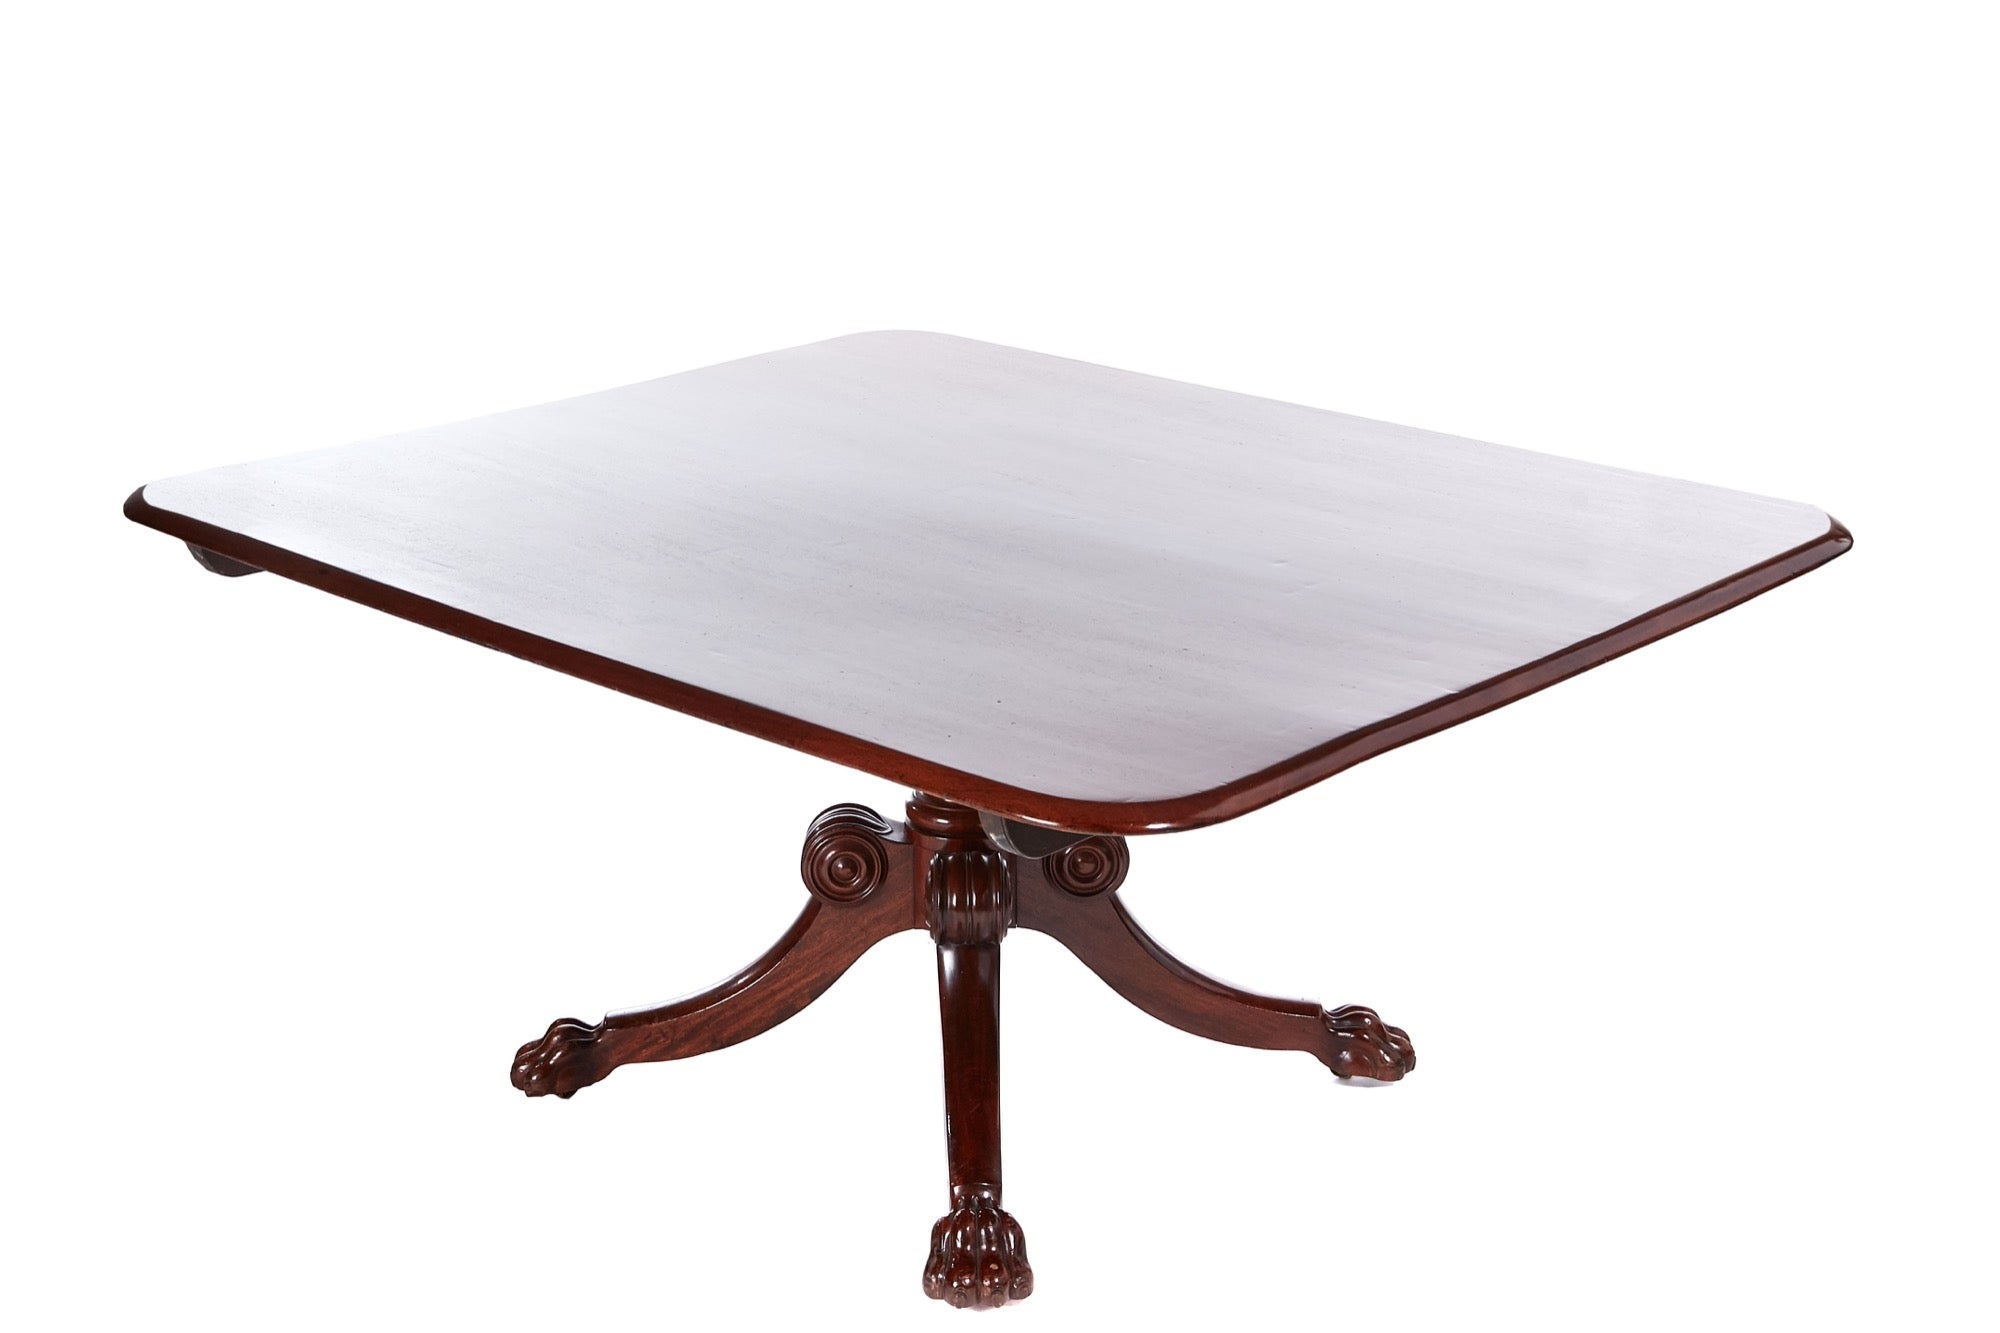 Large antique Regency quality mahogany centre table having a quality figured mahogany tilt top with a moulded edge supported on a turned pedestal column standing on four shaped sabre legs with carved paw feet and original castors

A handsome